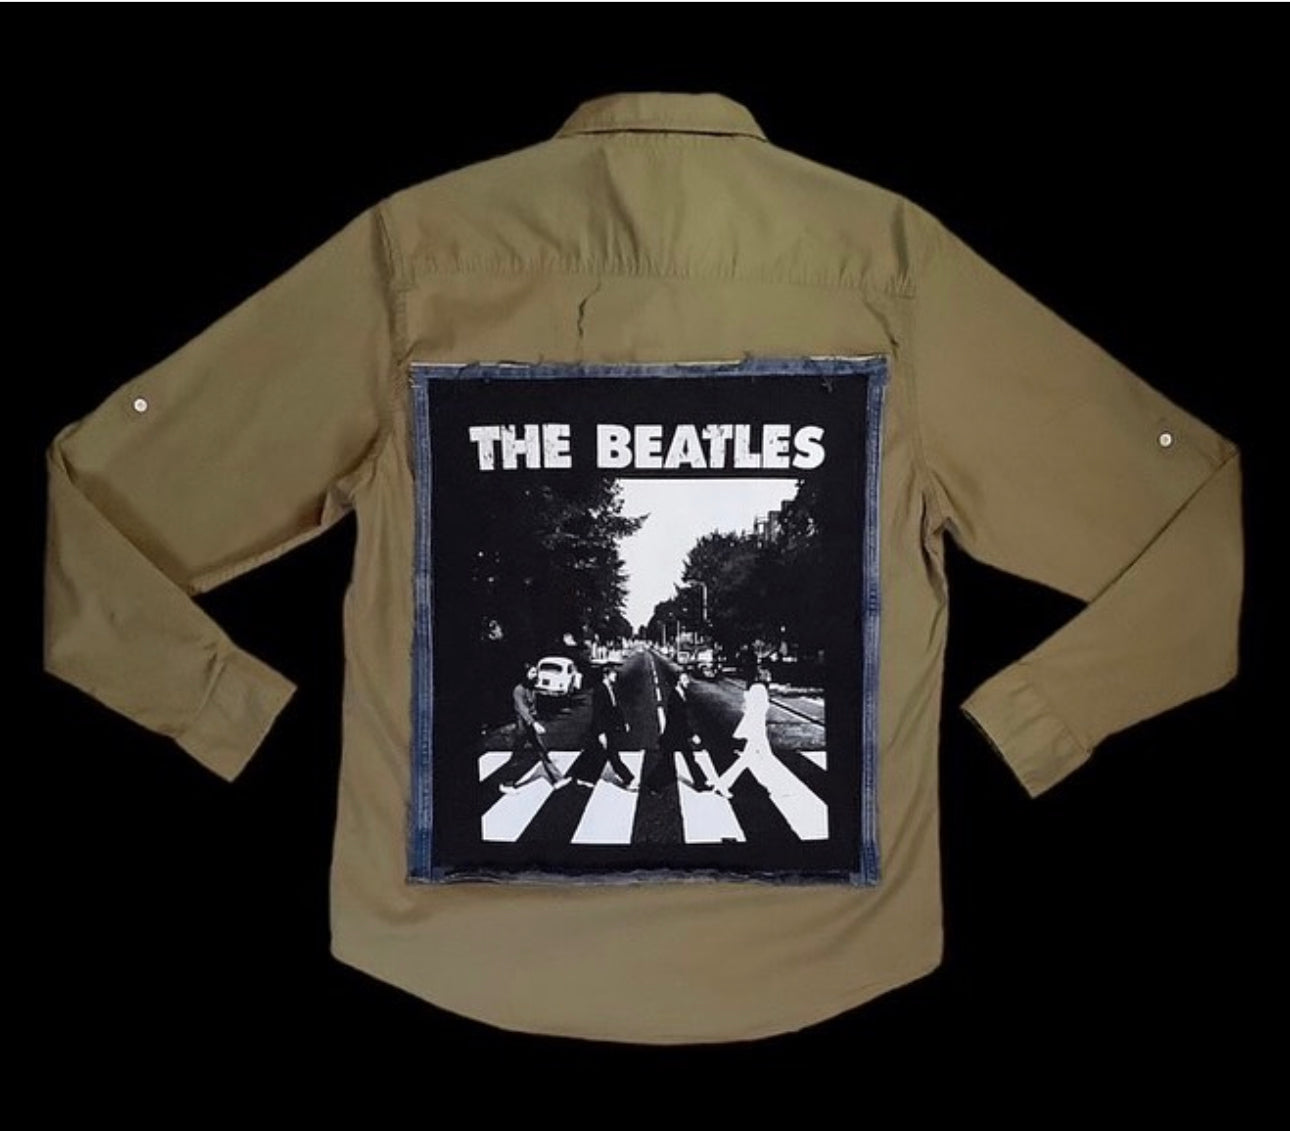 Customized “THE BEATLES” GRAPHIC SHIRT